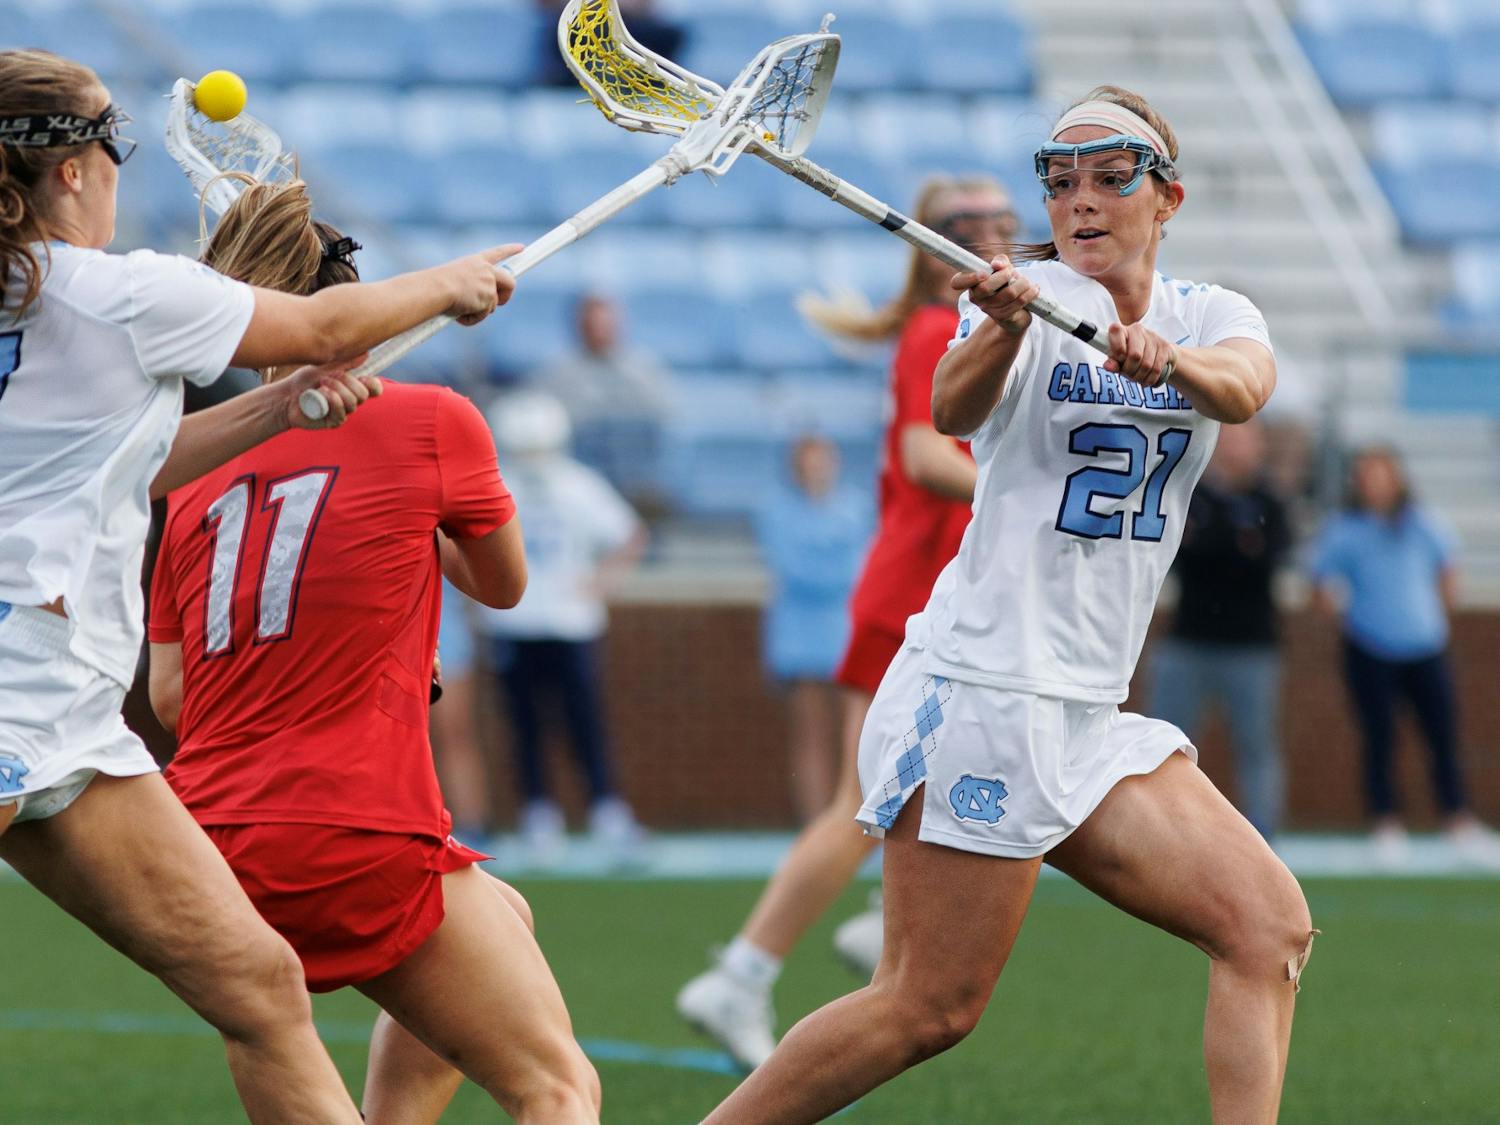 UNC first-year attacker Marissa White (21) fights for the ball during the women's lacrosse game against Liberty on Wednesday, Feb. 15, 2023, at Dorrance Field. UNC beat Liberty 18-6.